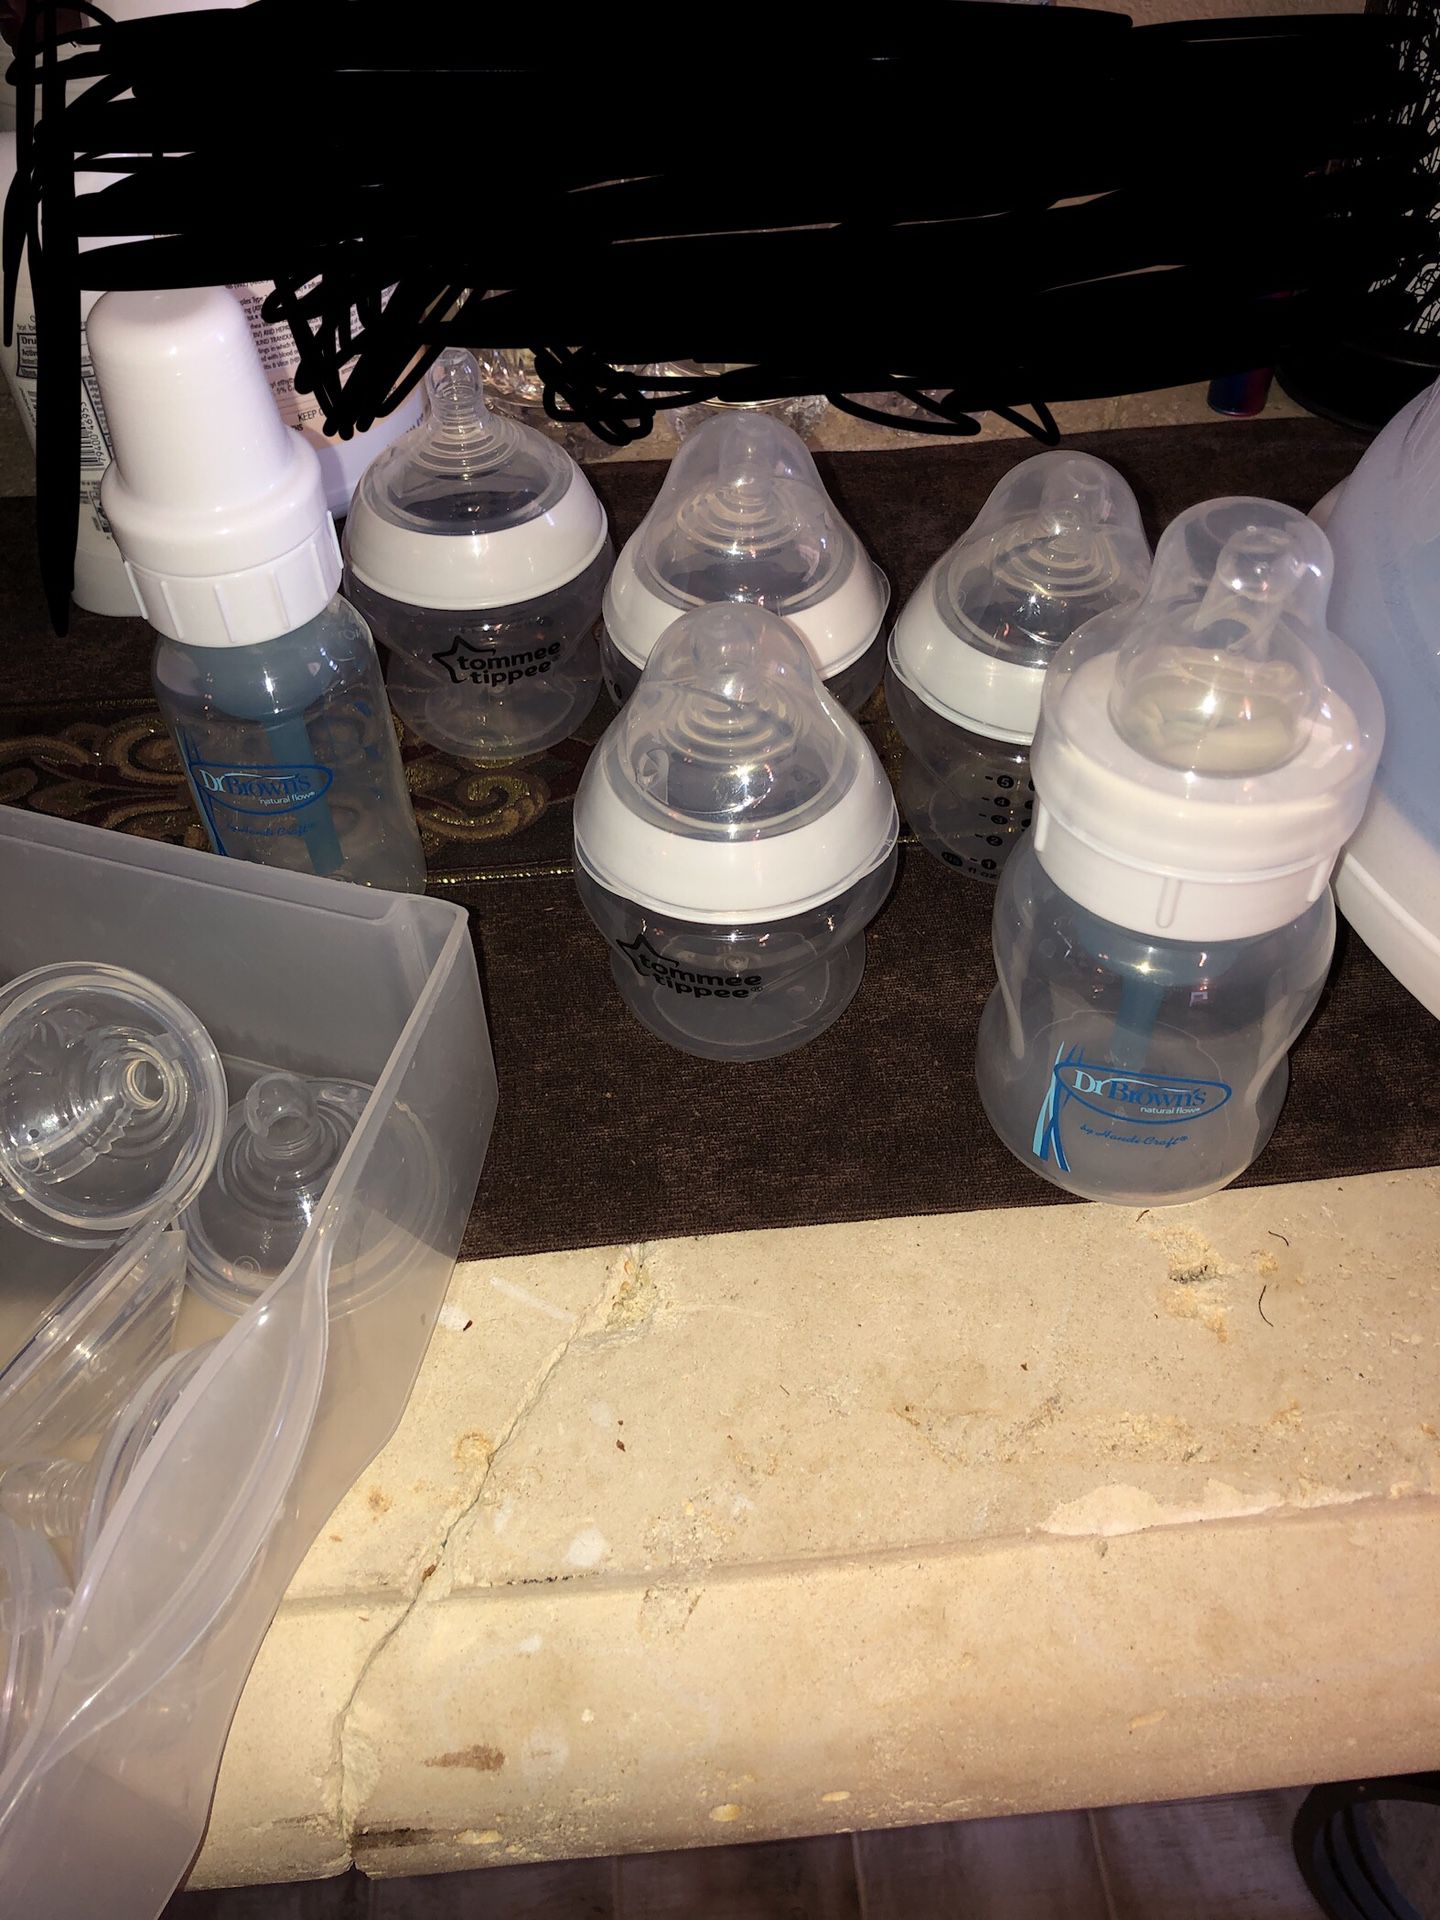 FREE Dr Browns , Tommee Tippee bottles, Munchkin sterilizer, dozens of size 0-1 nipples for Tommee Tippee